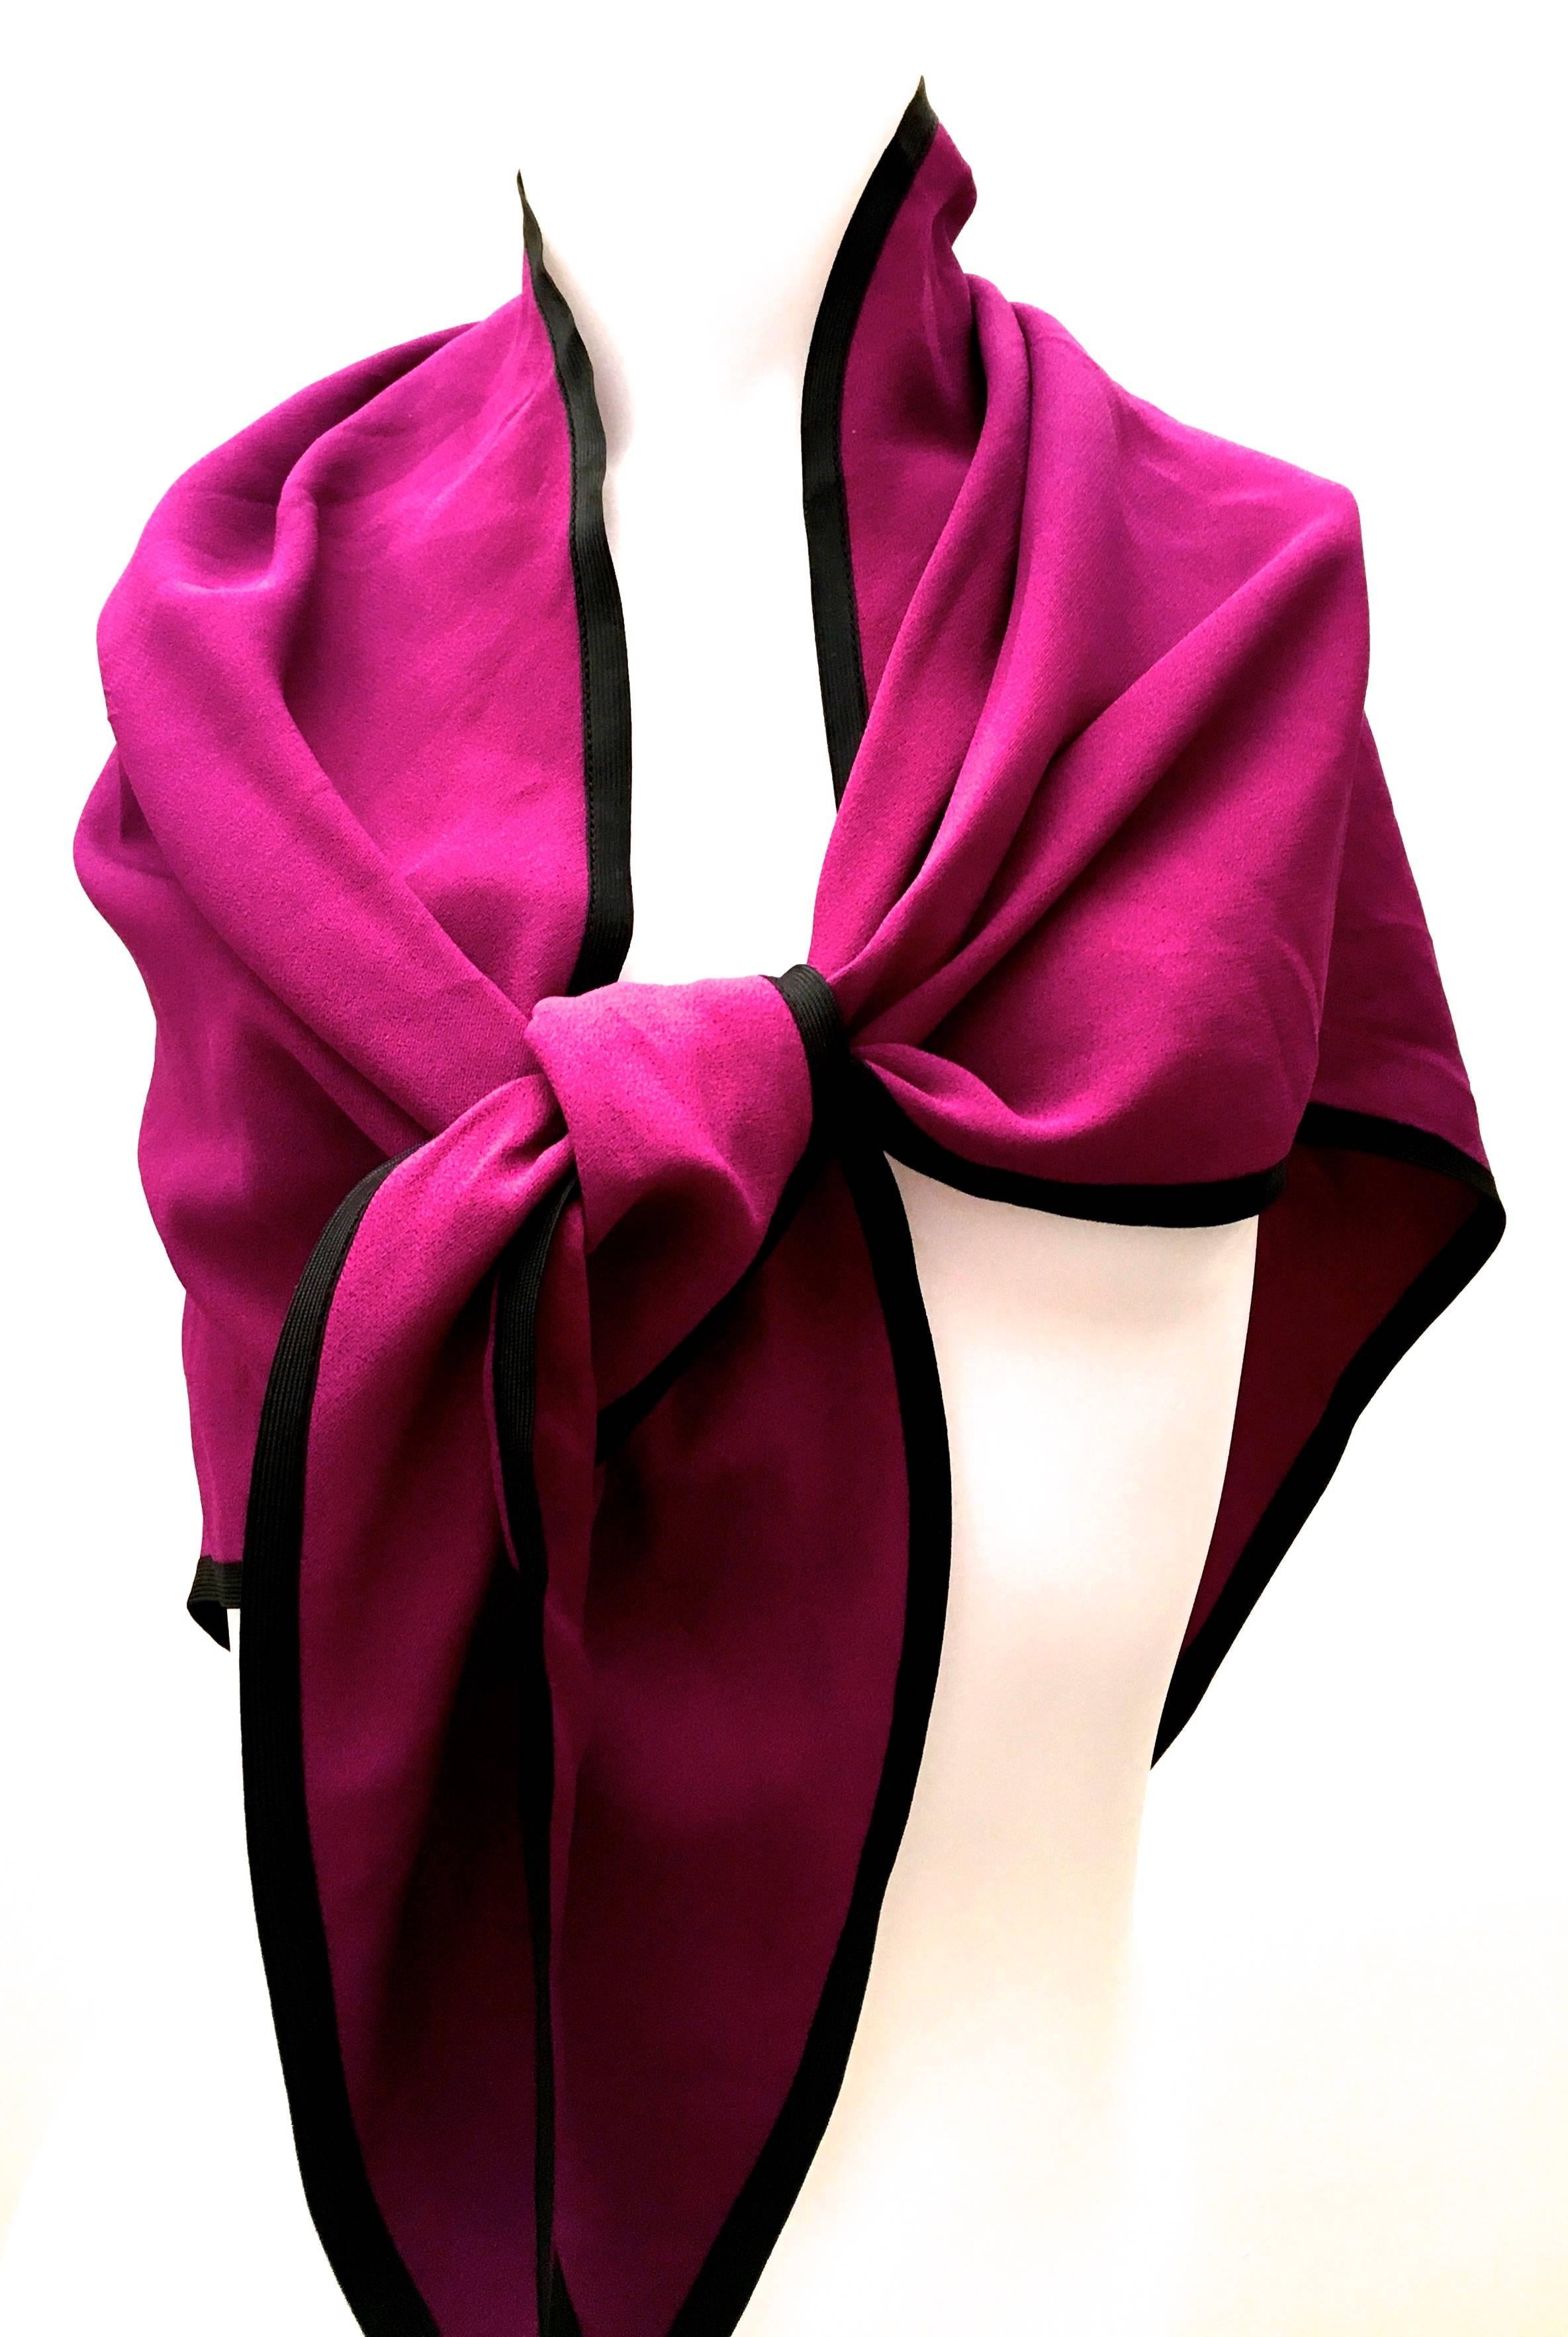 Presented here is magnificent Saint Laurent Rive Gauche shawl in beautiful shade of magenta. There is a 1/2 inch black flat silk ribbon trim around the perimeter of the shawl. The border highlights the rich coloring of the rest of the scarf. This